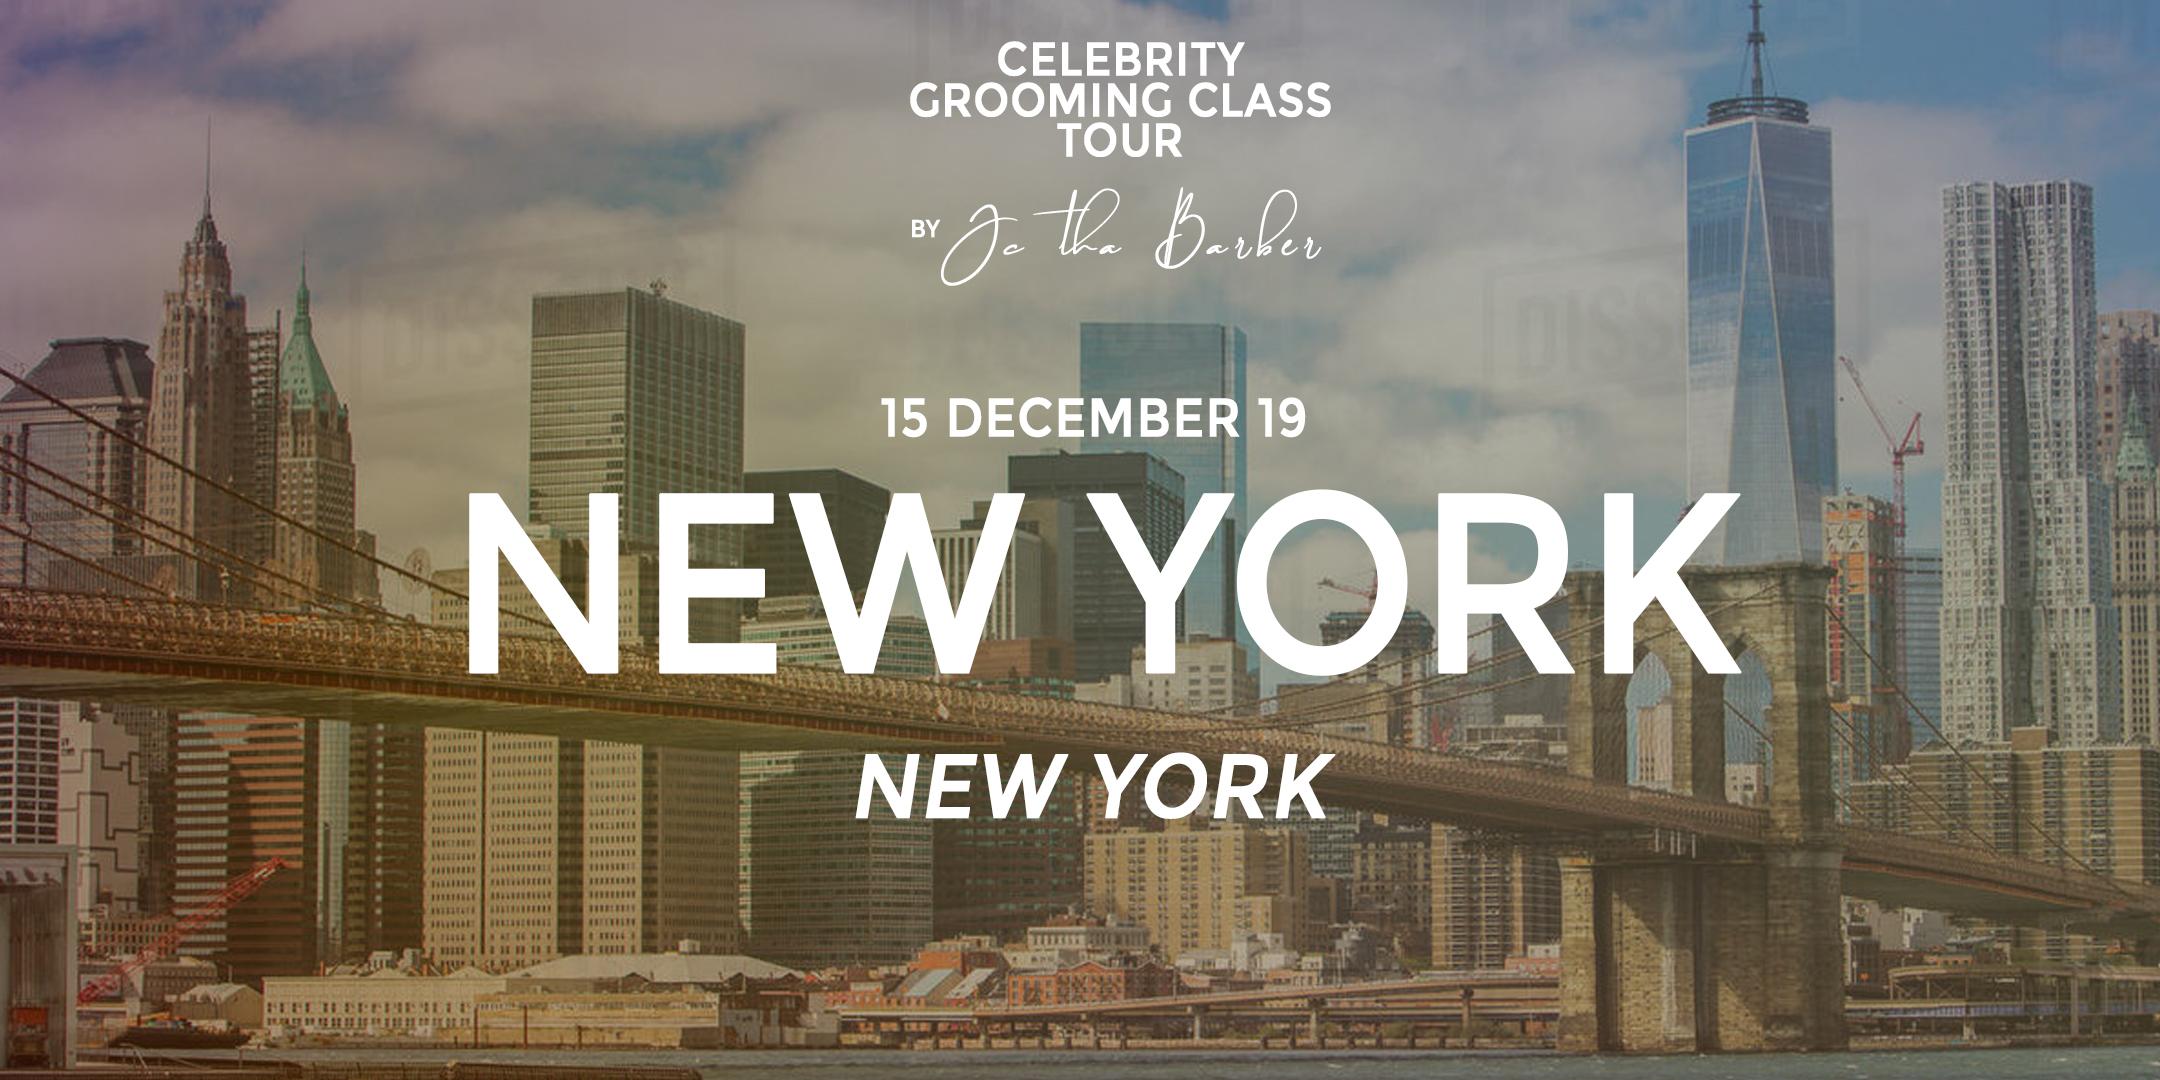 NEW YORK, NY - Celebrity Grooming Class by JC Tha Barber